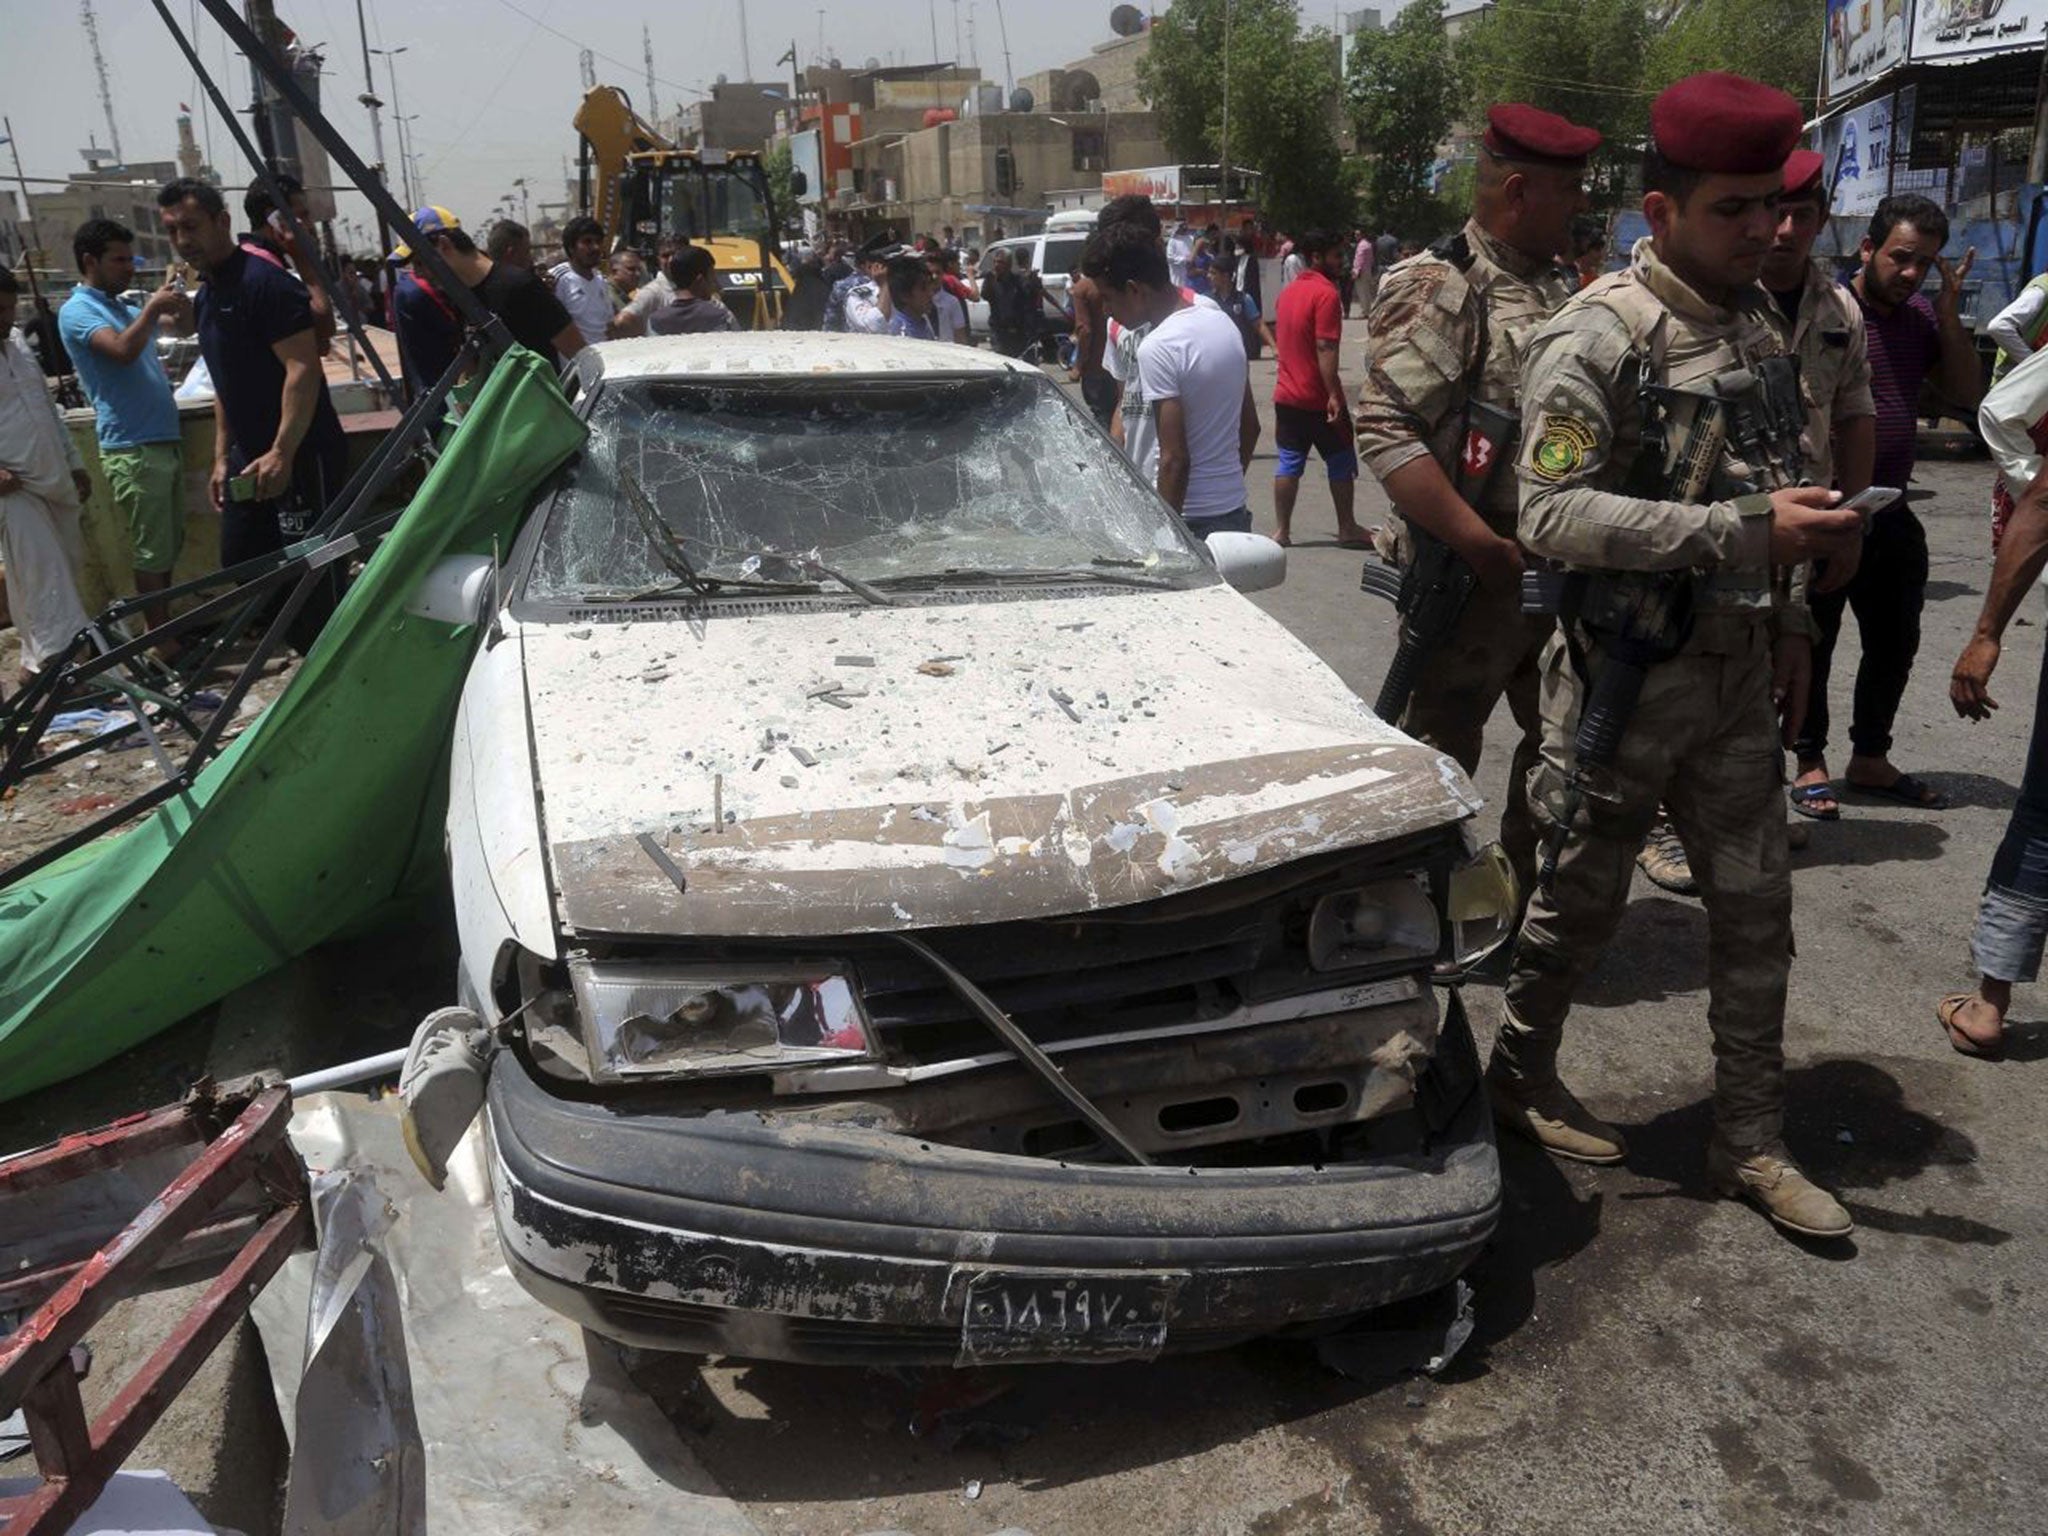 The bombings (not pictured) came after weeks of Isis attacks on civilians in Iraq